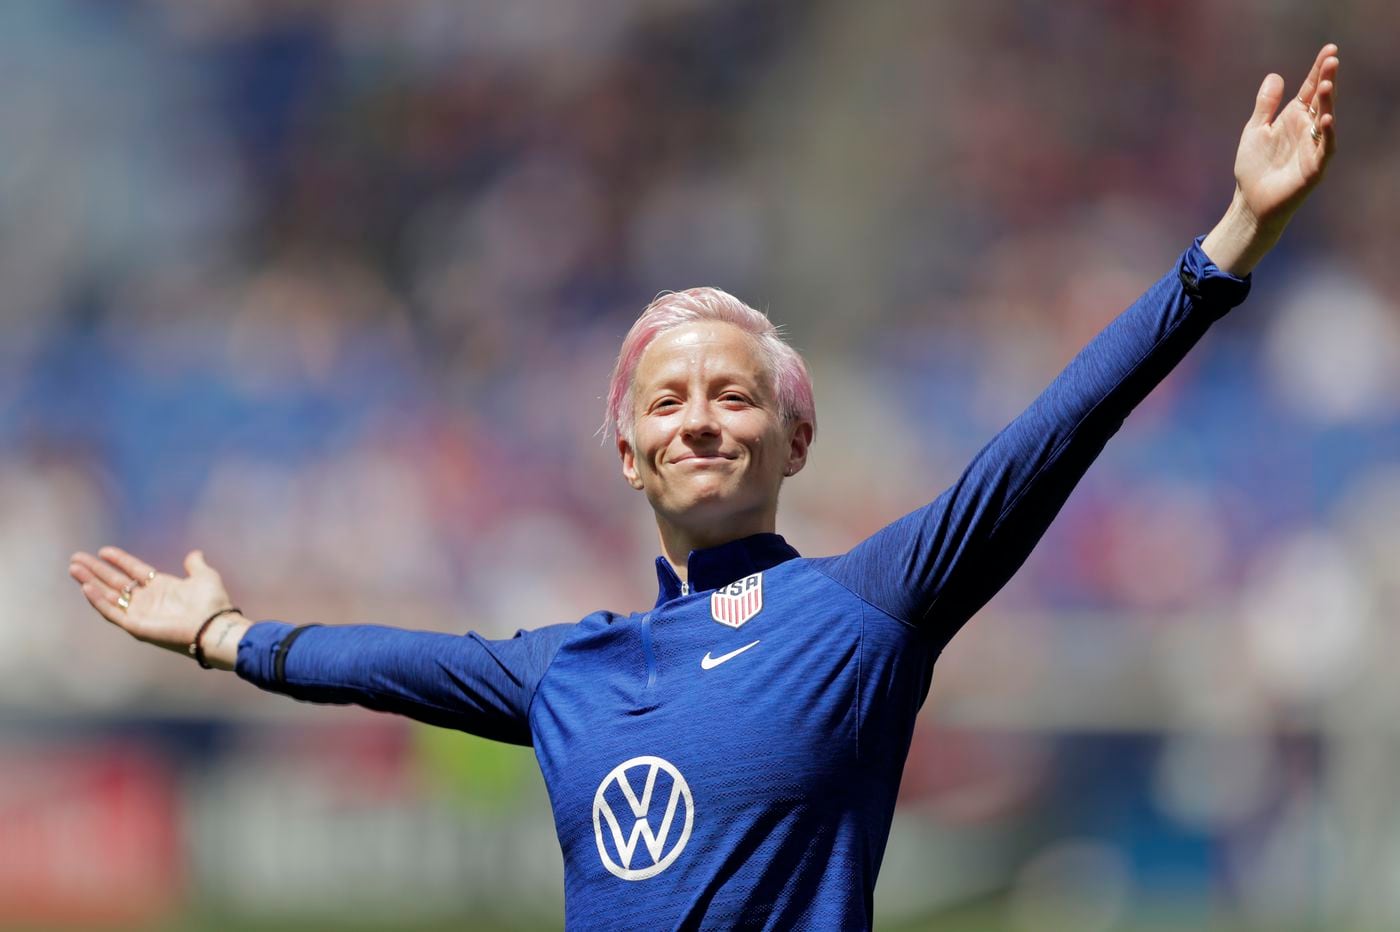 USWNT’s Megan Rapinoe heads to World Cup playing some of the best ...